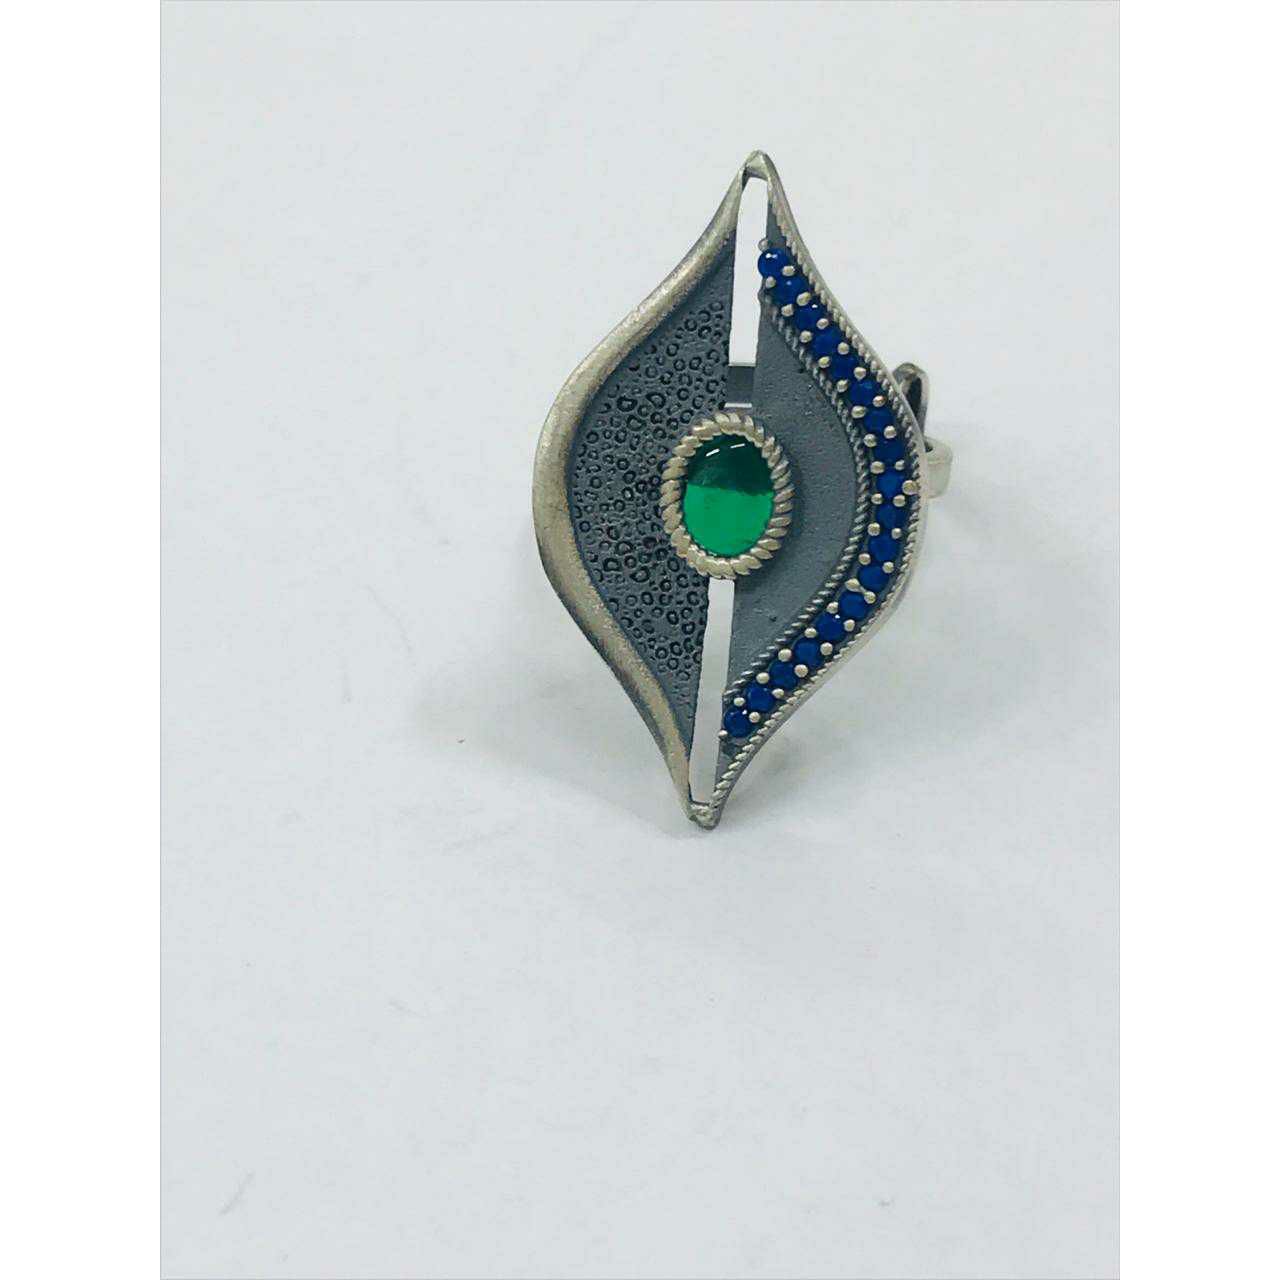 Peacock design Indian Classical cultural 925 sterling silver adjustable ring,  best tribal ethnic jewelry Navratri jewelry sr395 | TRIBAL ORNAMENTS